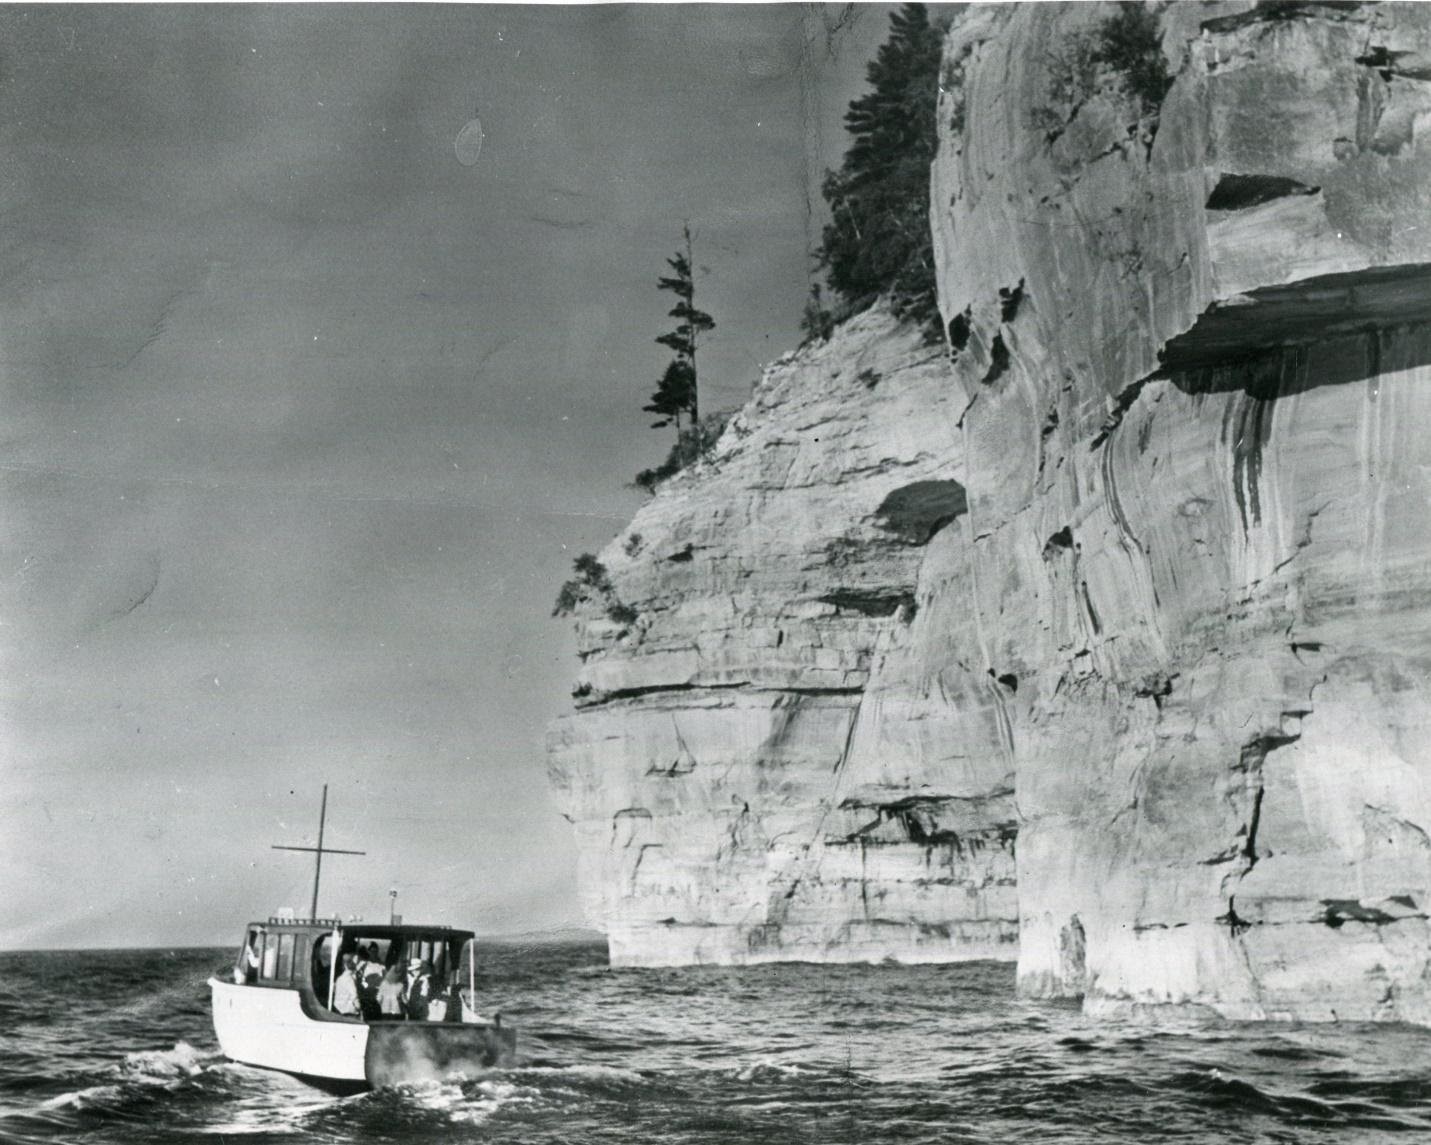 A tour boat cruises by the Pictured Rocks cliffs. PC: the Alger County Historical Society.